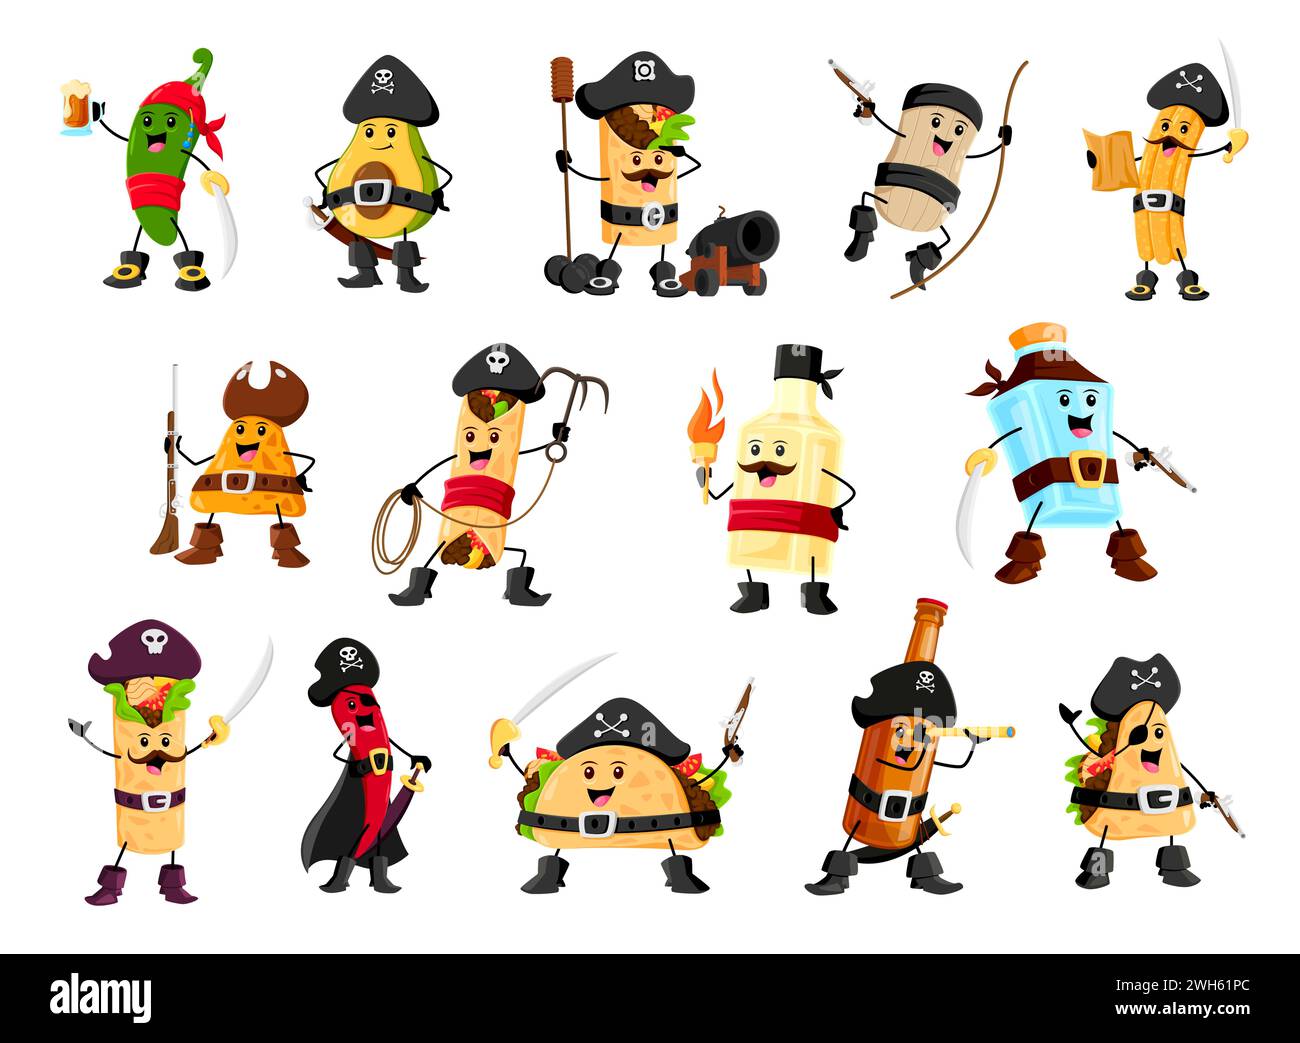 Cartoon pirate and corsair tex mex mexican food and drink characters. Cute filibuster captain and sailors fast food vector personages. Happy pirate taco, nachos, burrito and chili, avocado and tequila Stock Vector